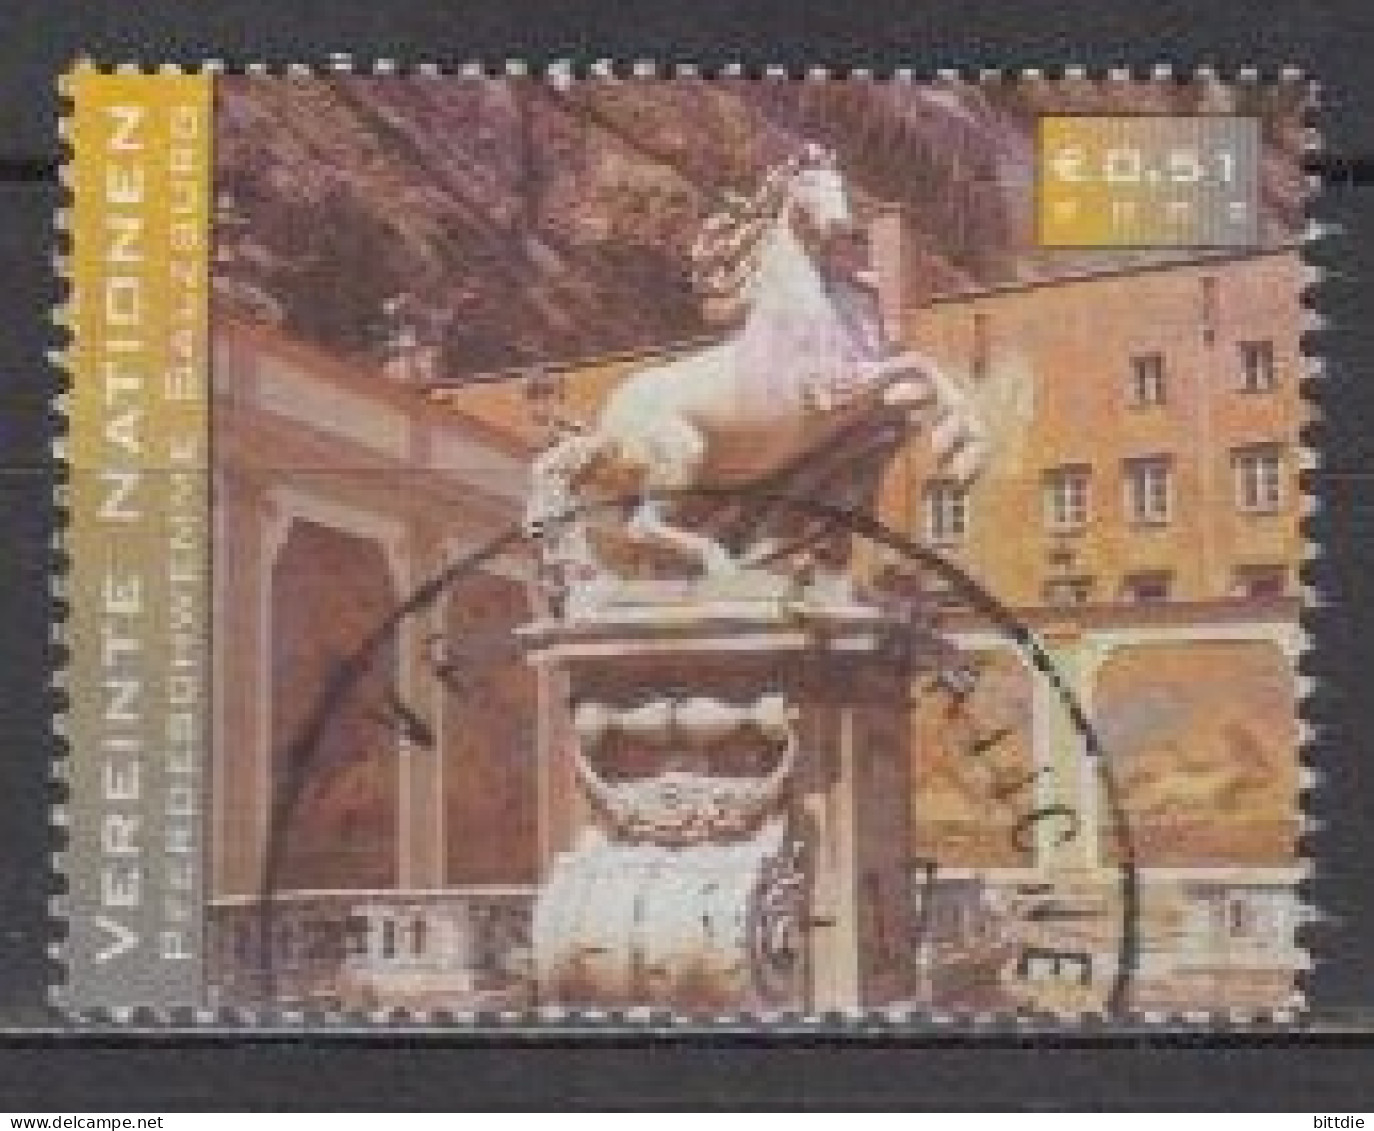 UNO-Wien  352 , O  (J 2025) - Used Stamps